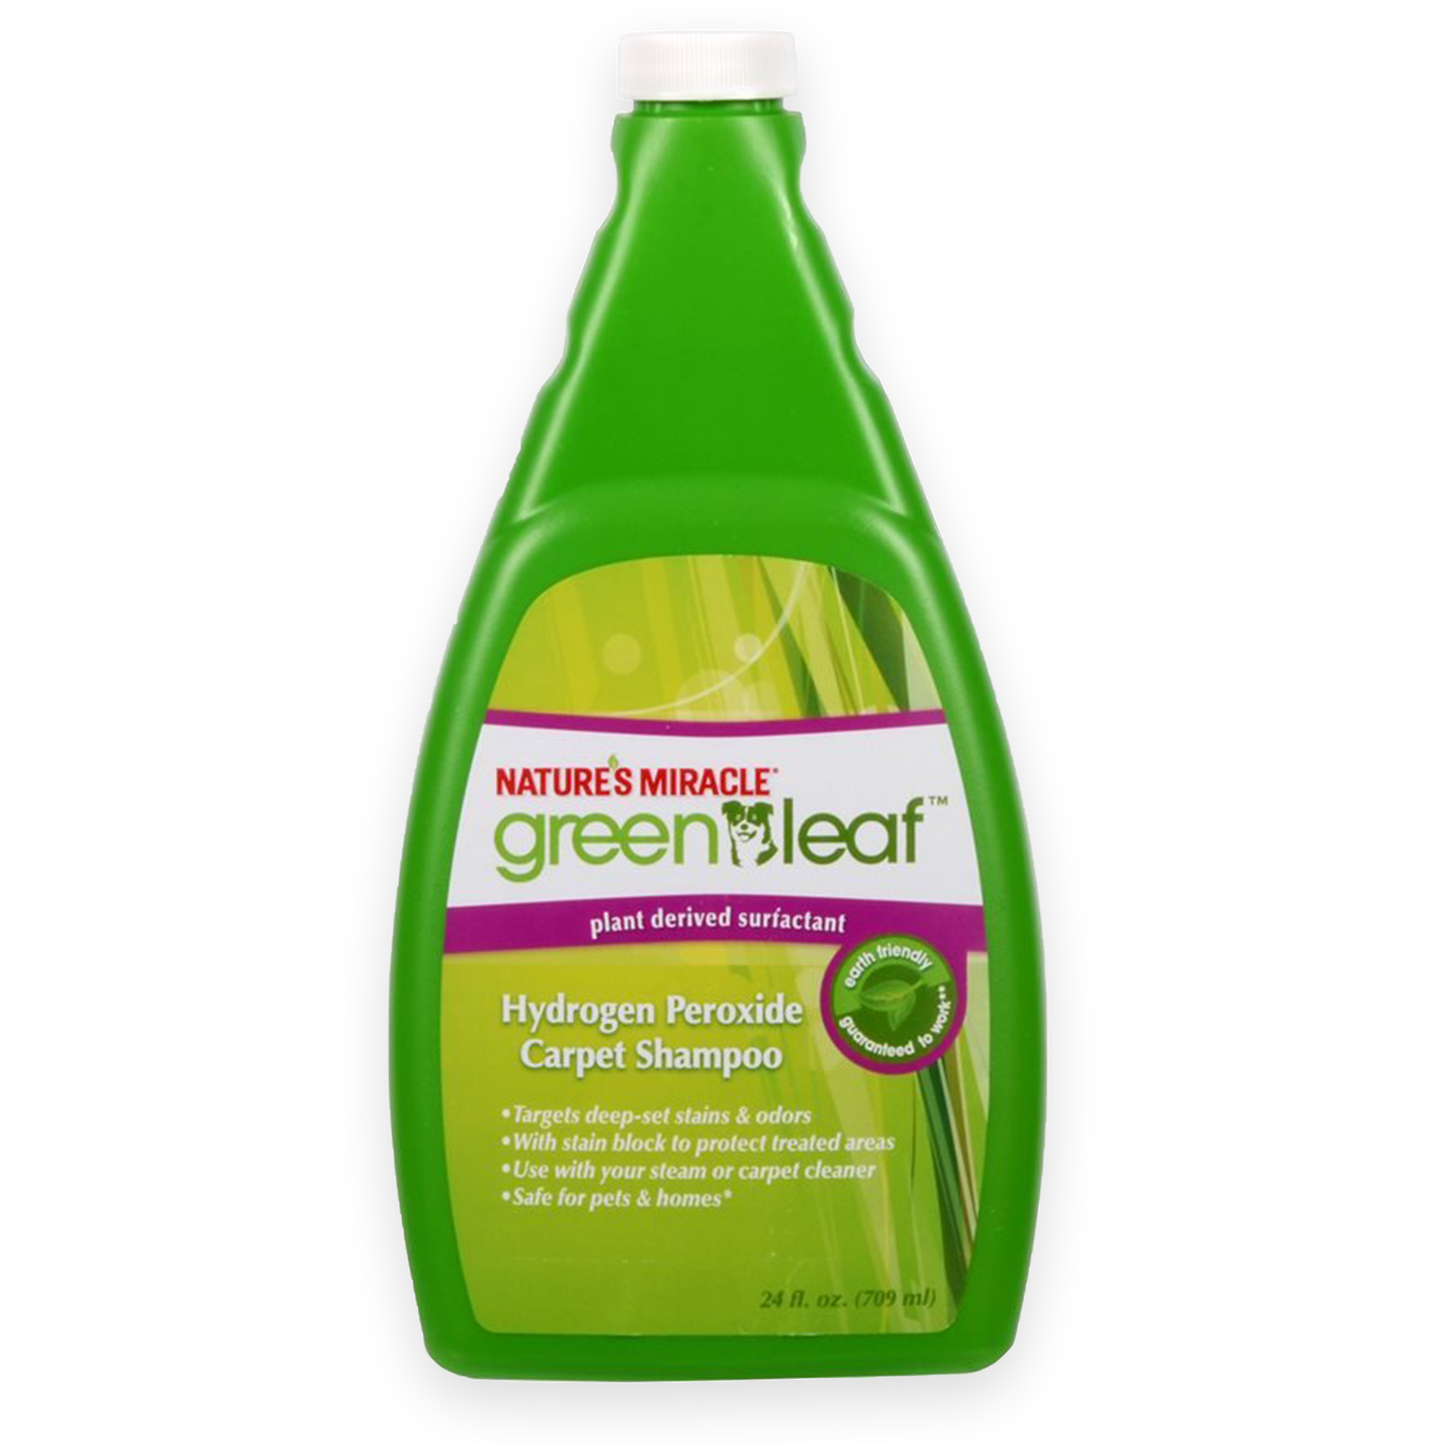 Natures Miracle Green Leaf Hydrogen Peroxide Carpet Shampoo for Deep Pet Stains & Odours (709ml)